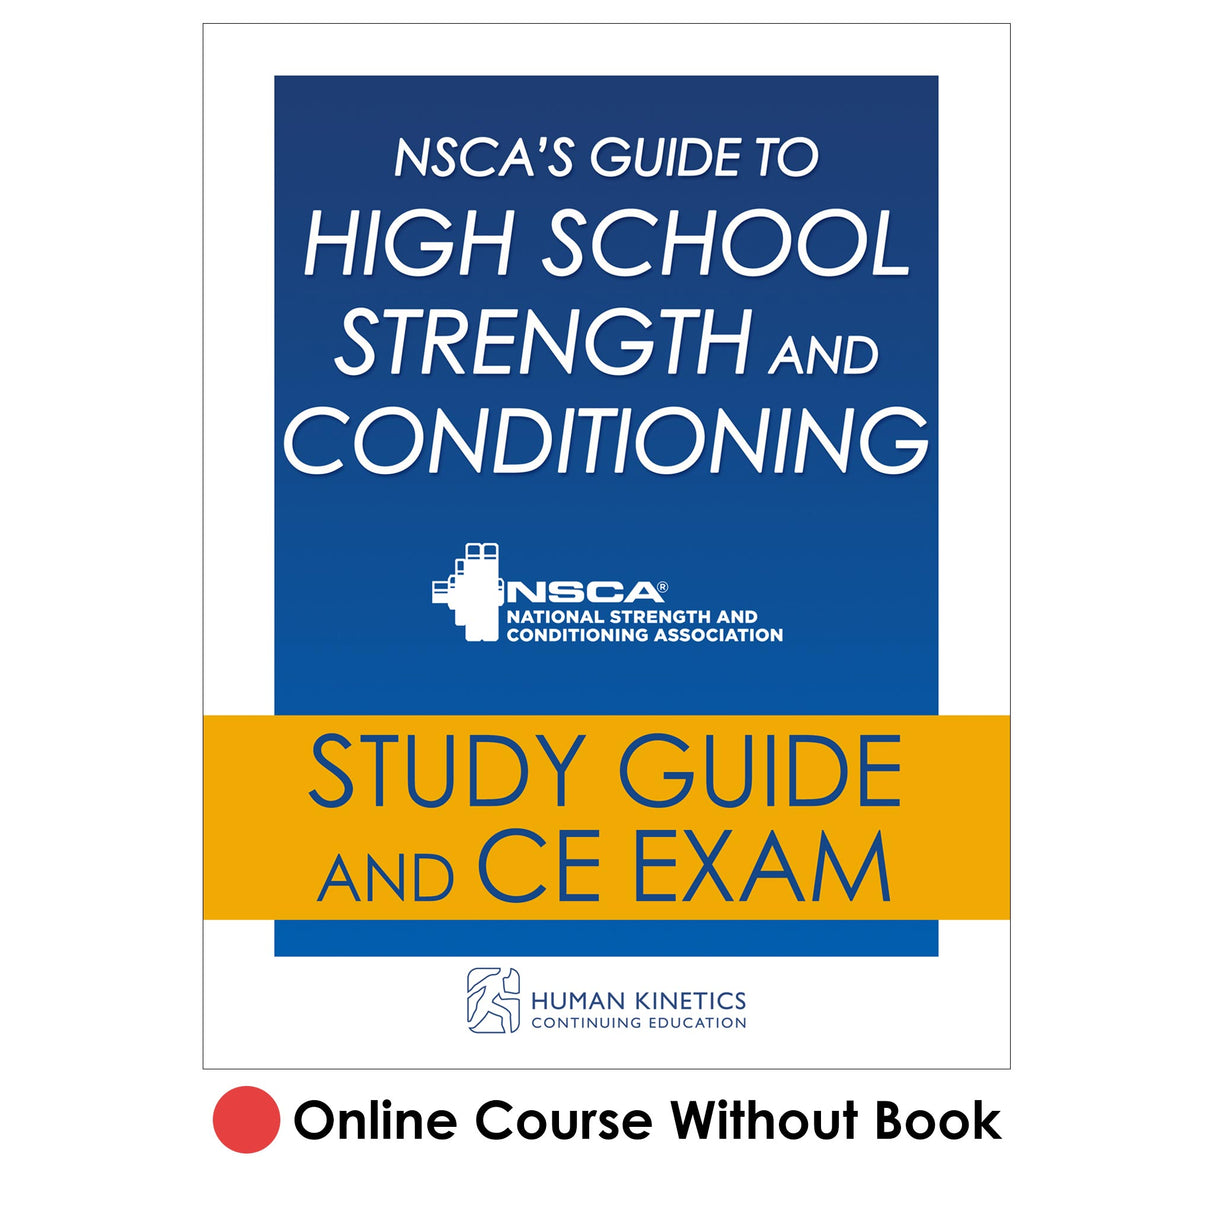 NSCA's Guide to High School Strength and Conditioning Online CE Course Without Book